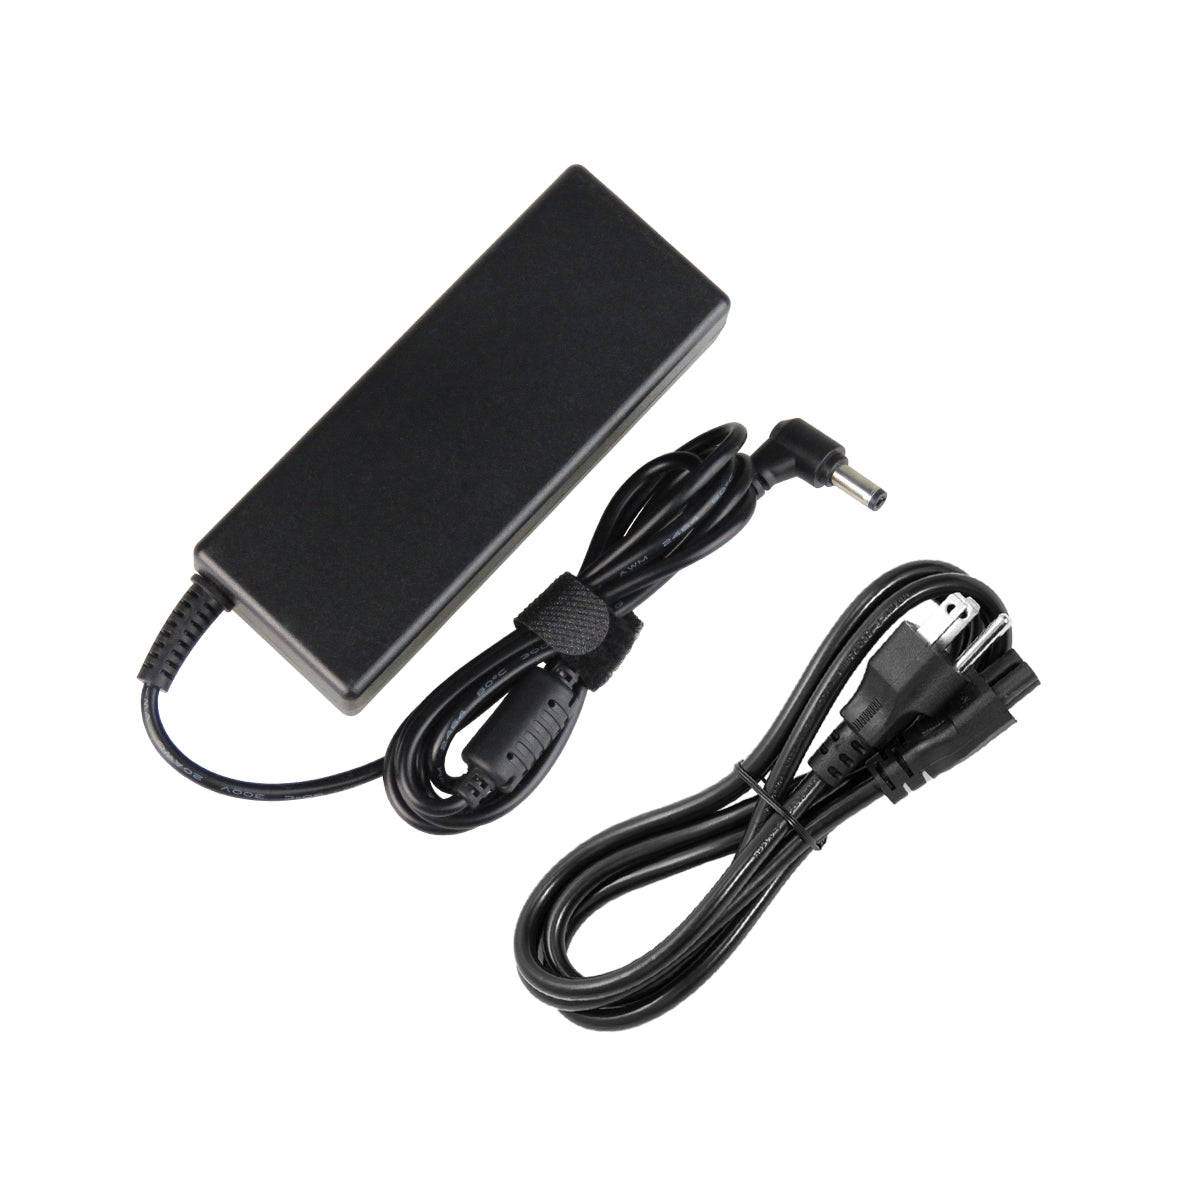 AC Adapter Charger for ASUS X54C-BBK7 Notebook.